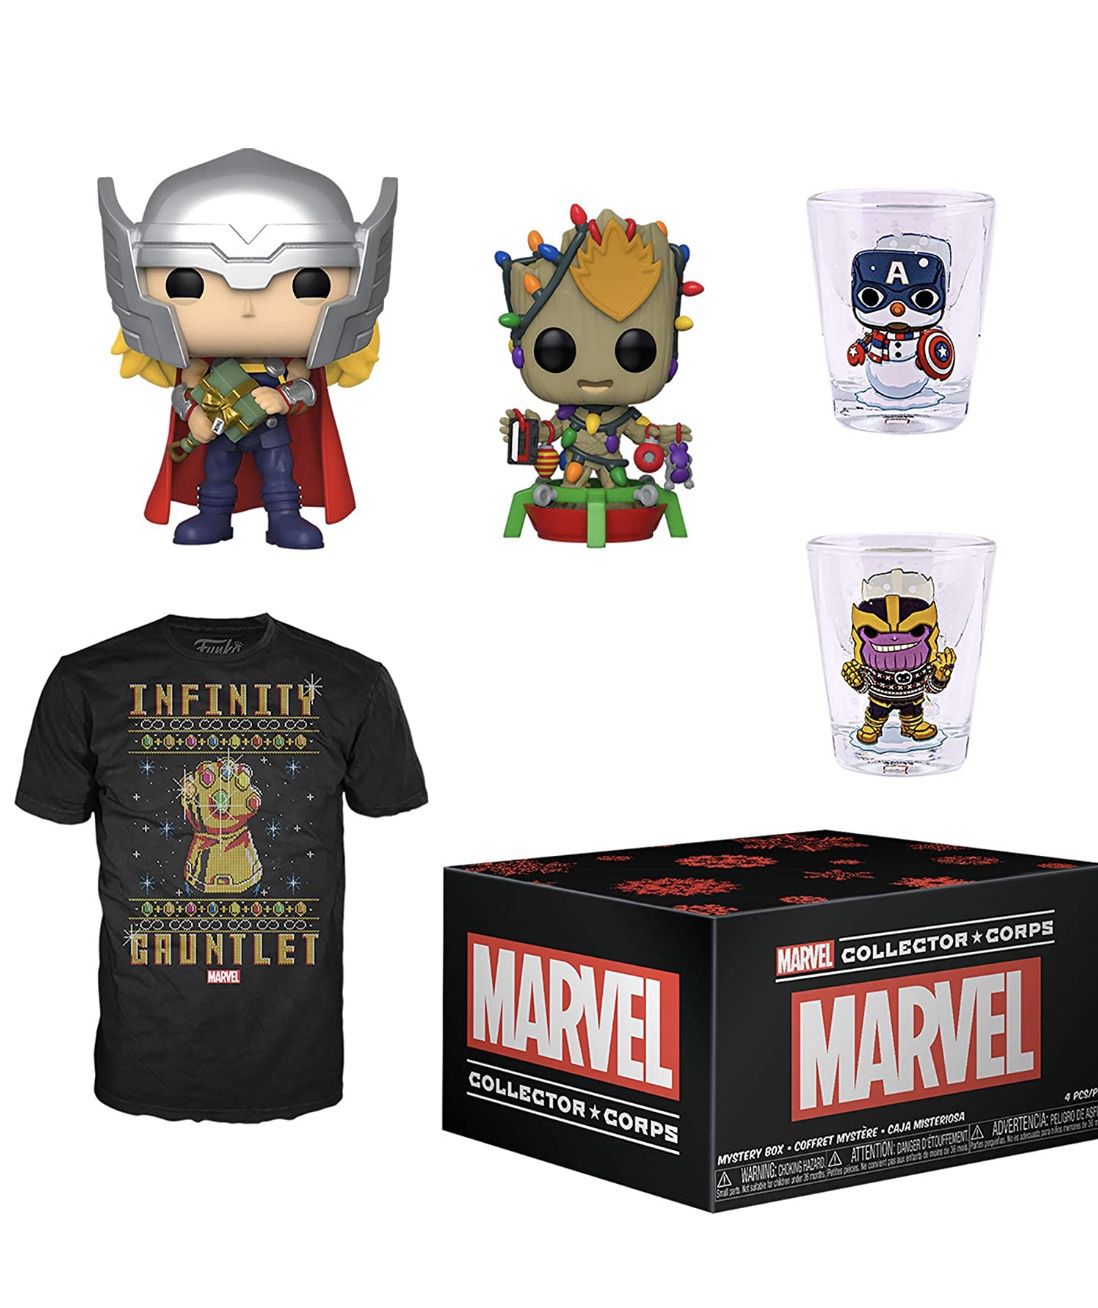 Funko Marvel Collectors Corps Box 19.99 thor groot Pop tshirt and shit glass set